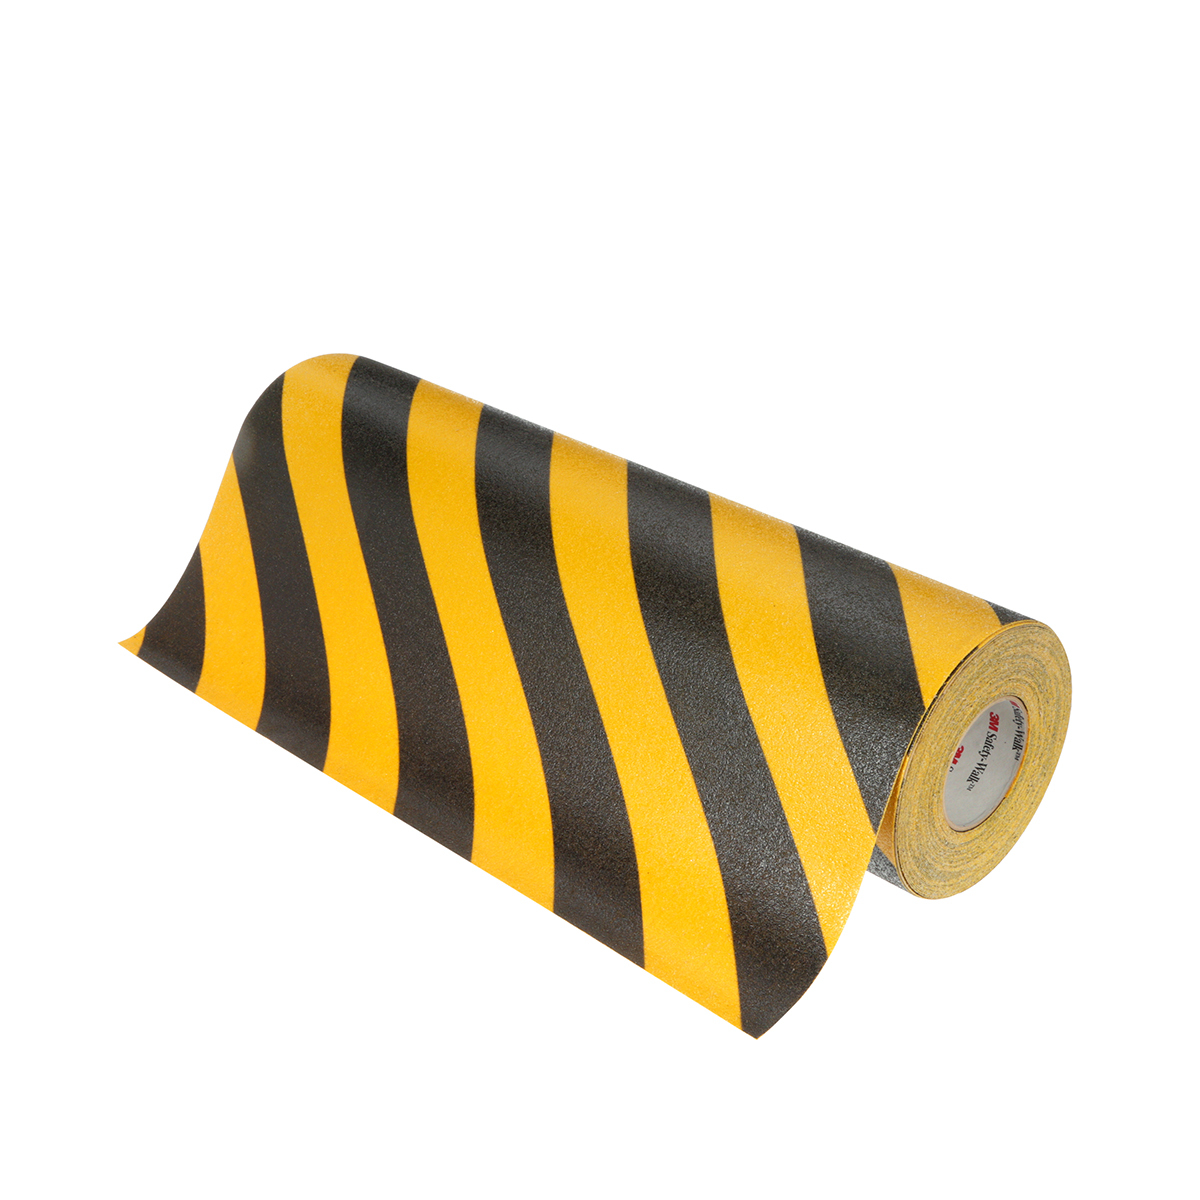 3M™ Safety-Walk™ Slip-Resistant General Purpose Tapes & Treads 613, Black/Yellow Stripe, 6 in x 24 in